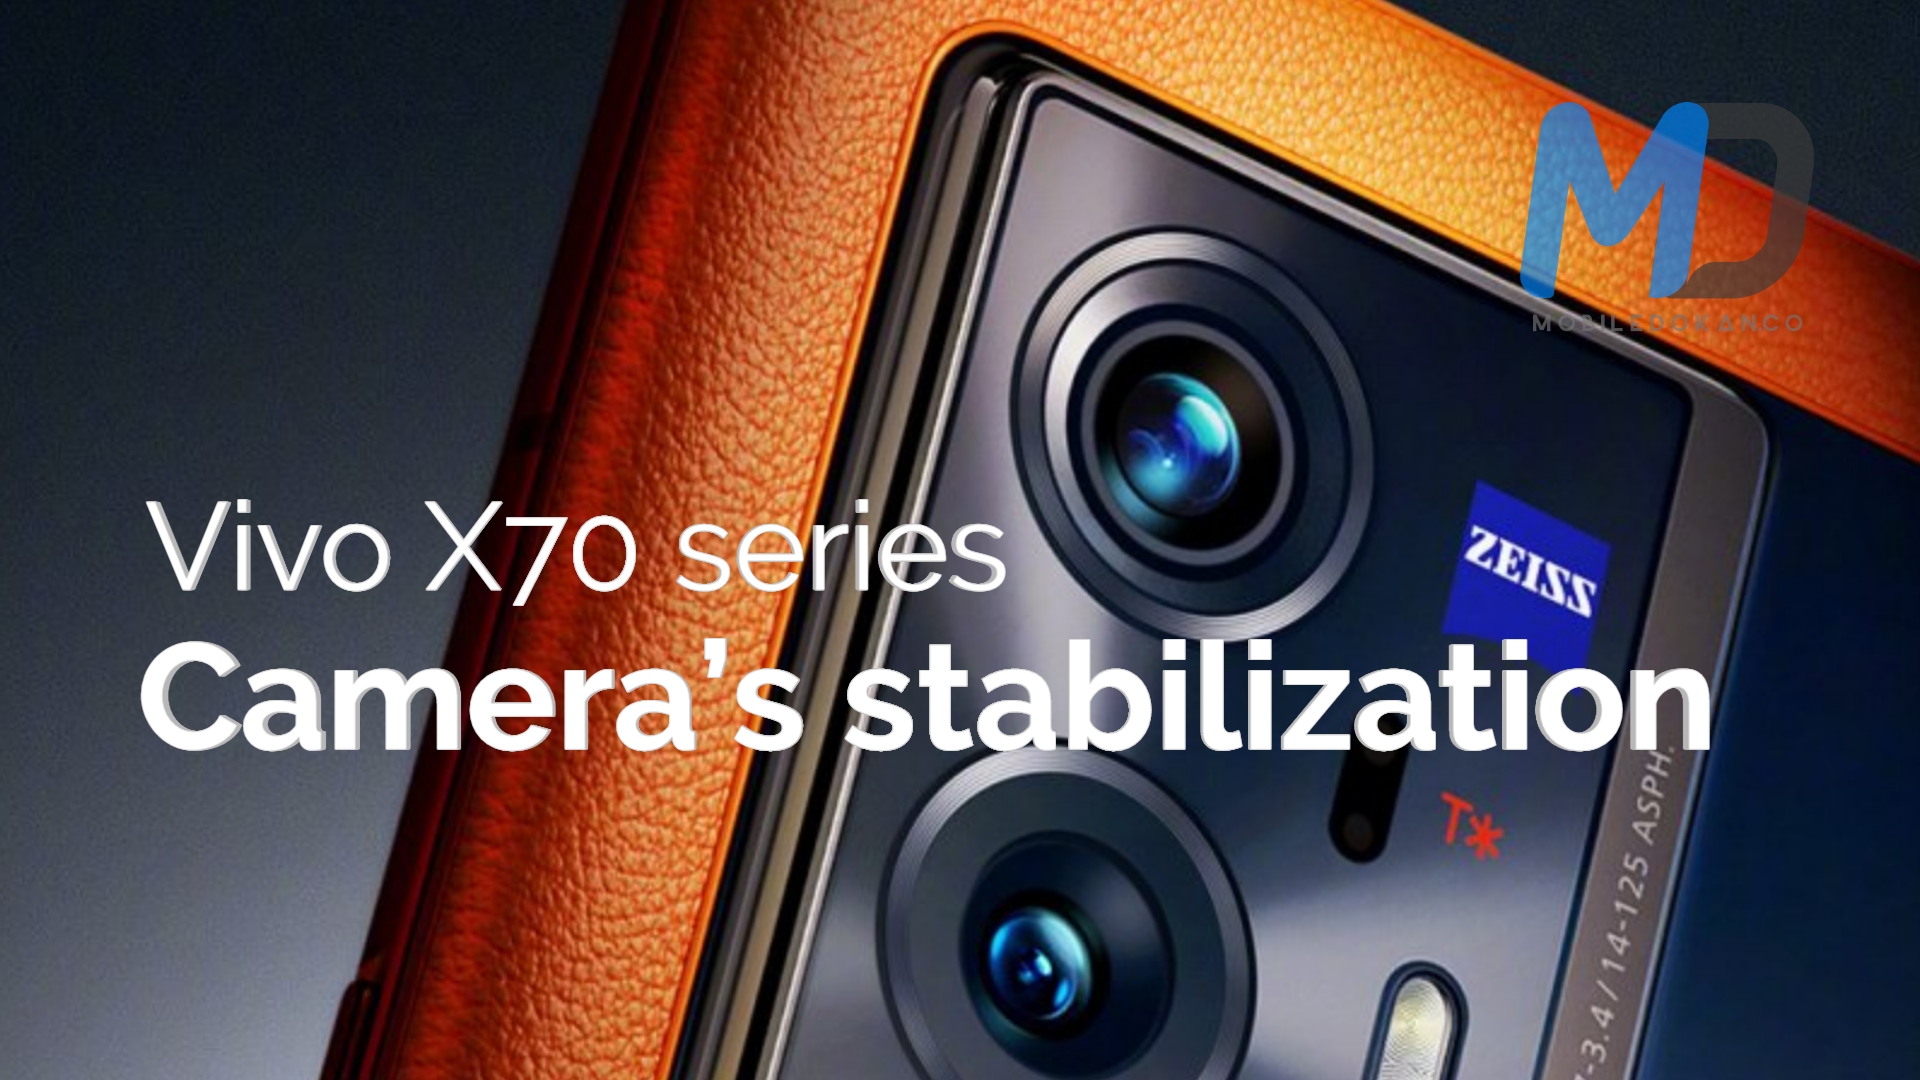 Vivo X70 series published highlights the camera’s stabilization